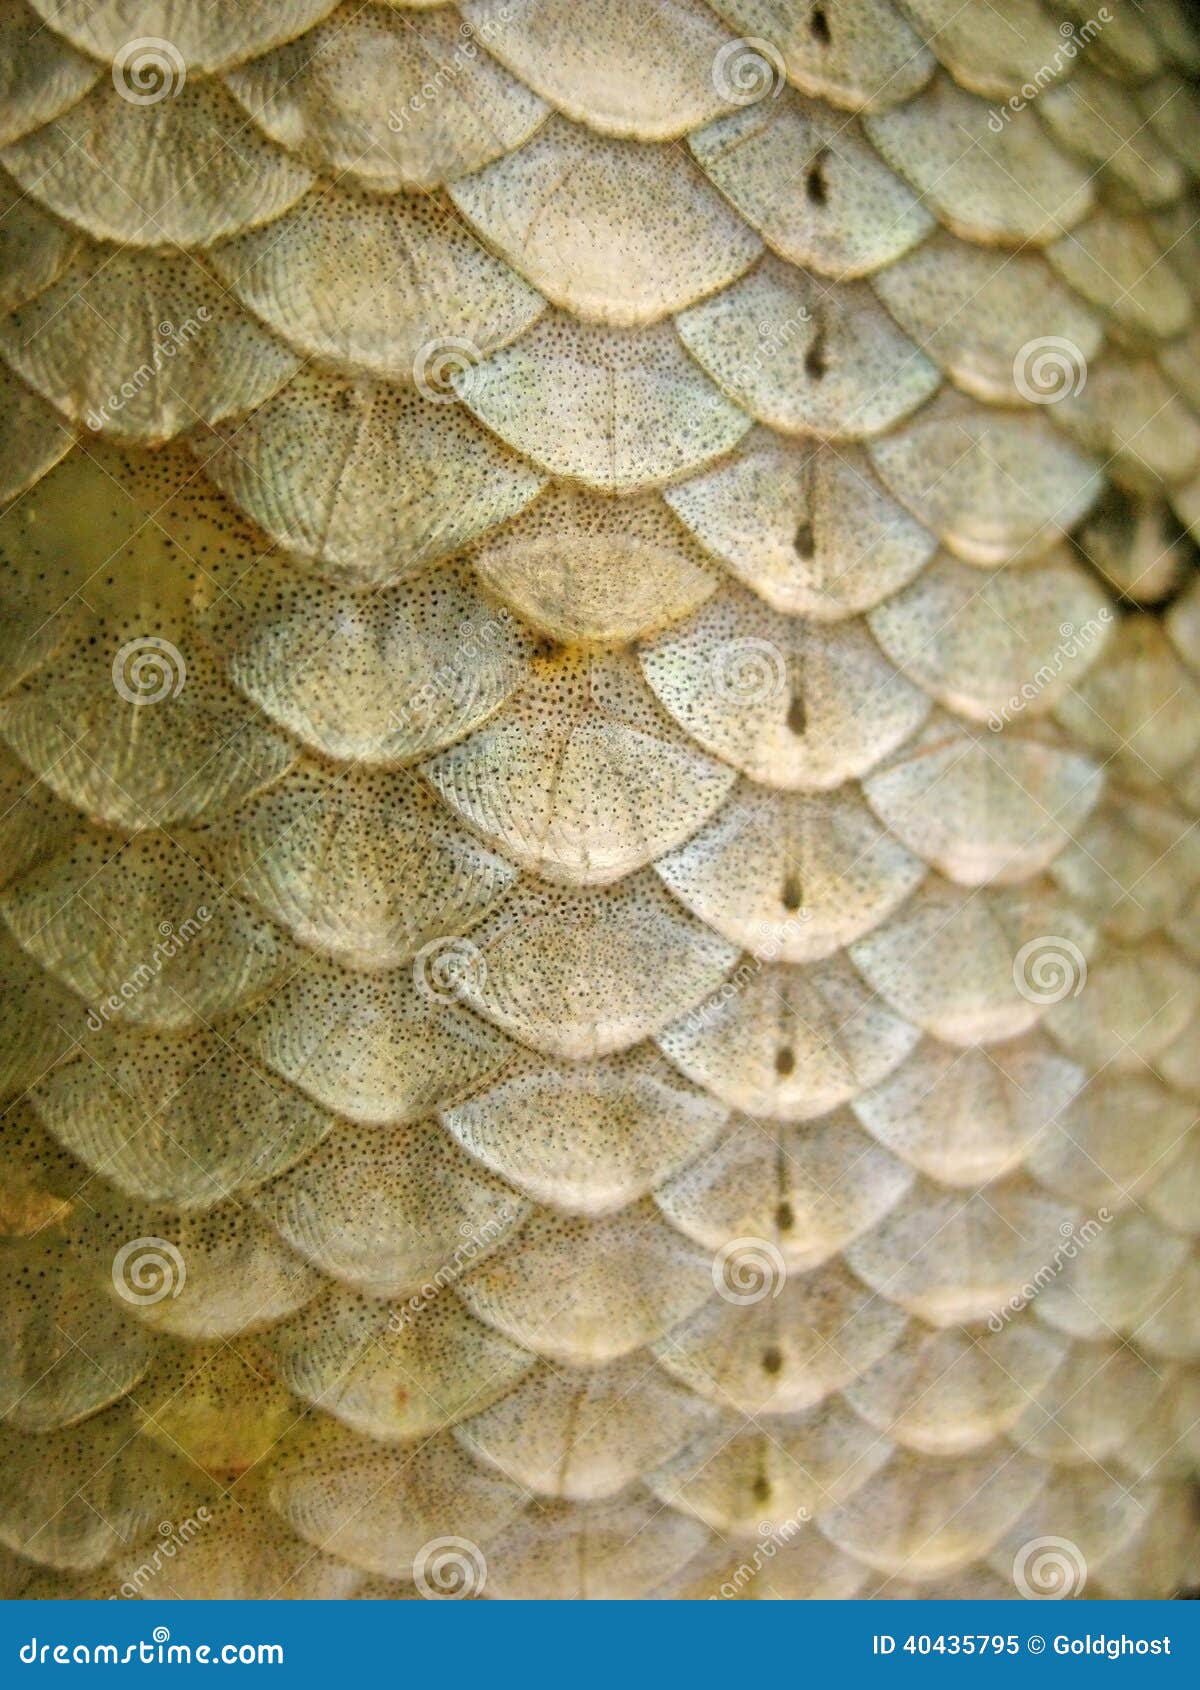 Fish scales stock image. Image of closeup, area, banner - 40435795